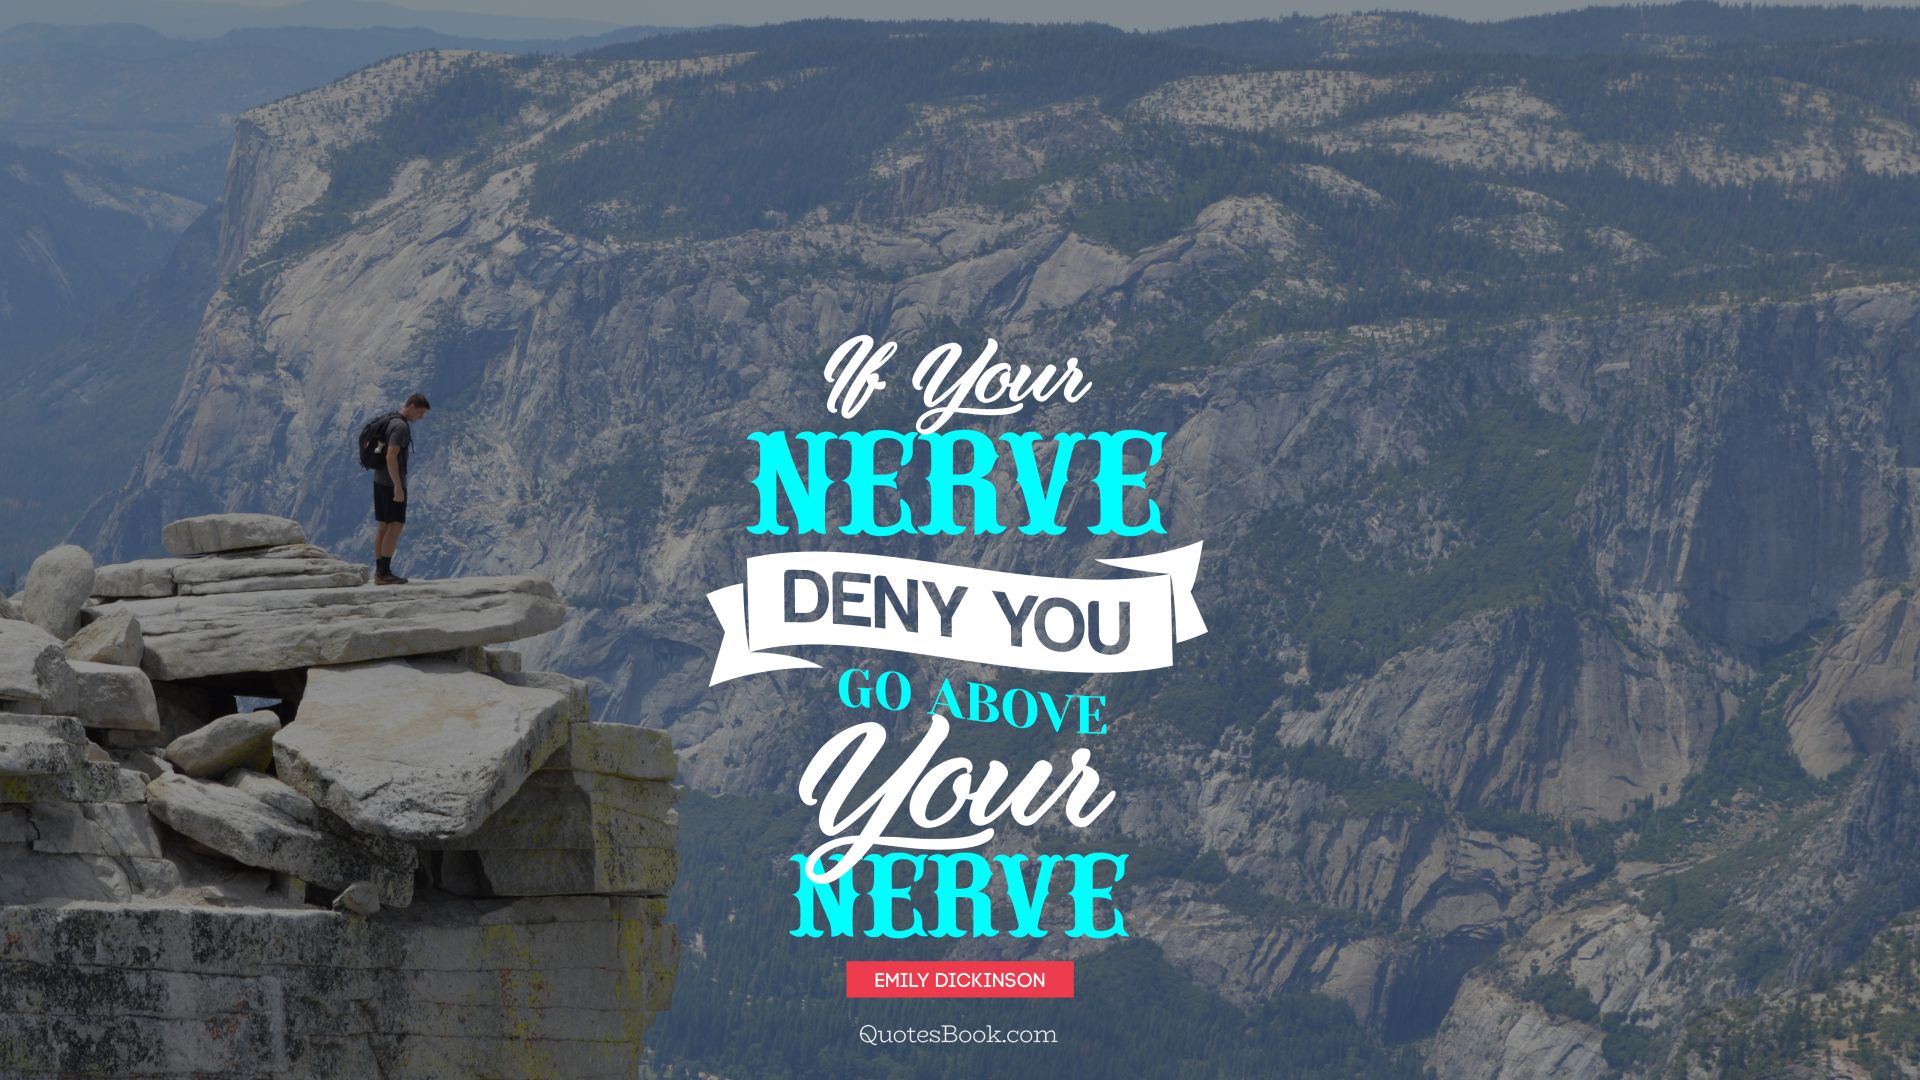 If your nerve, deny you - go above your nerve. - Quote by Emily Dickinson